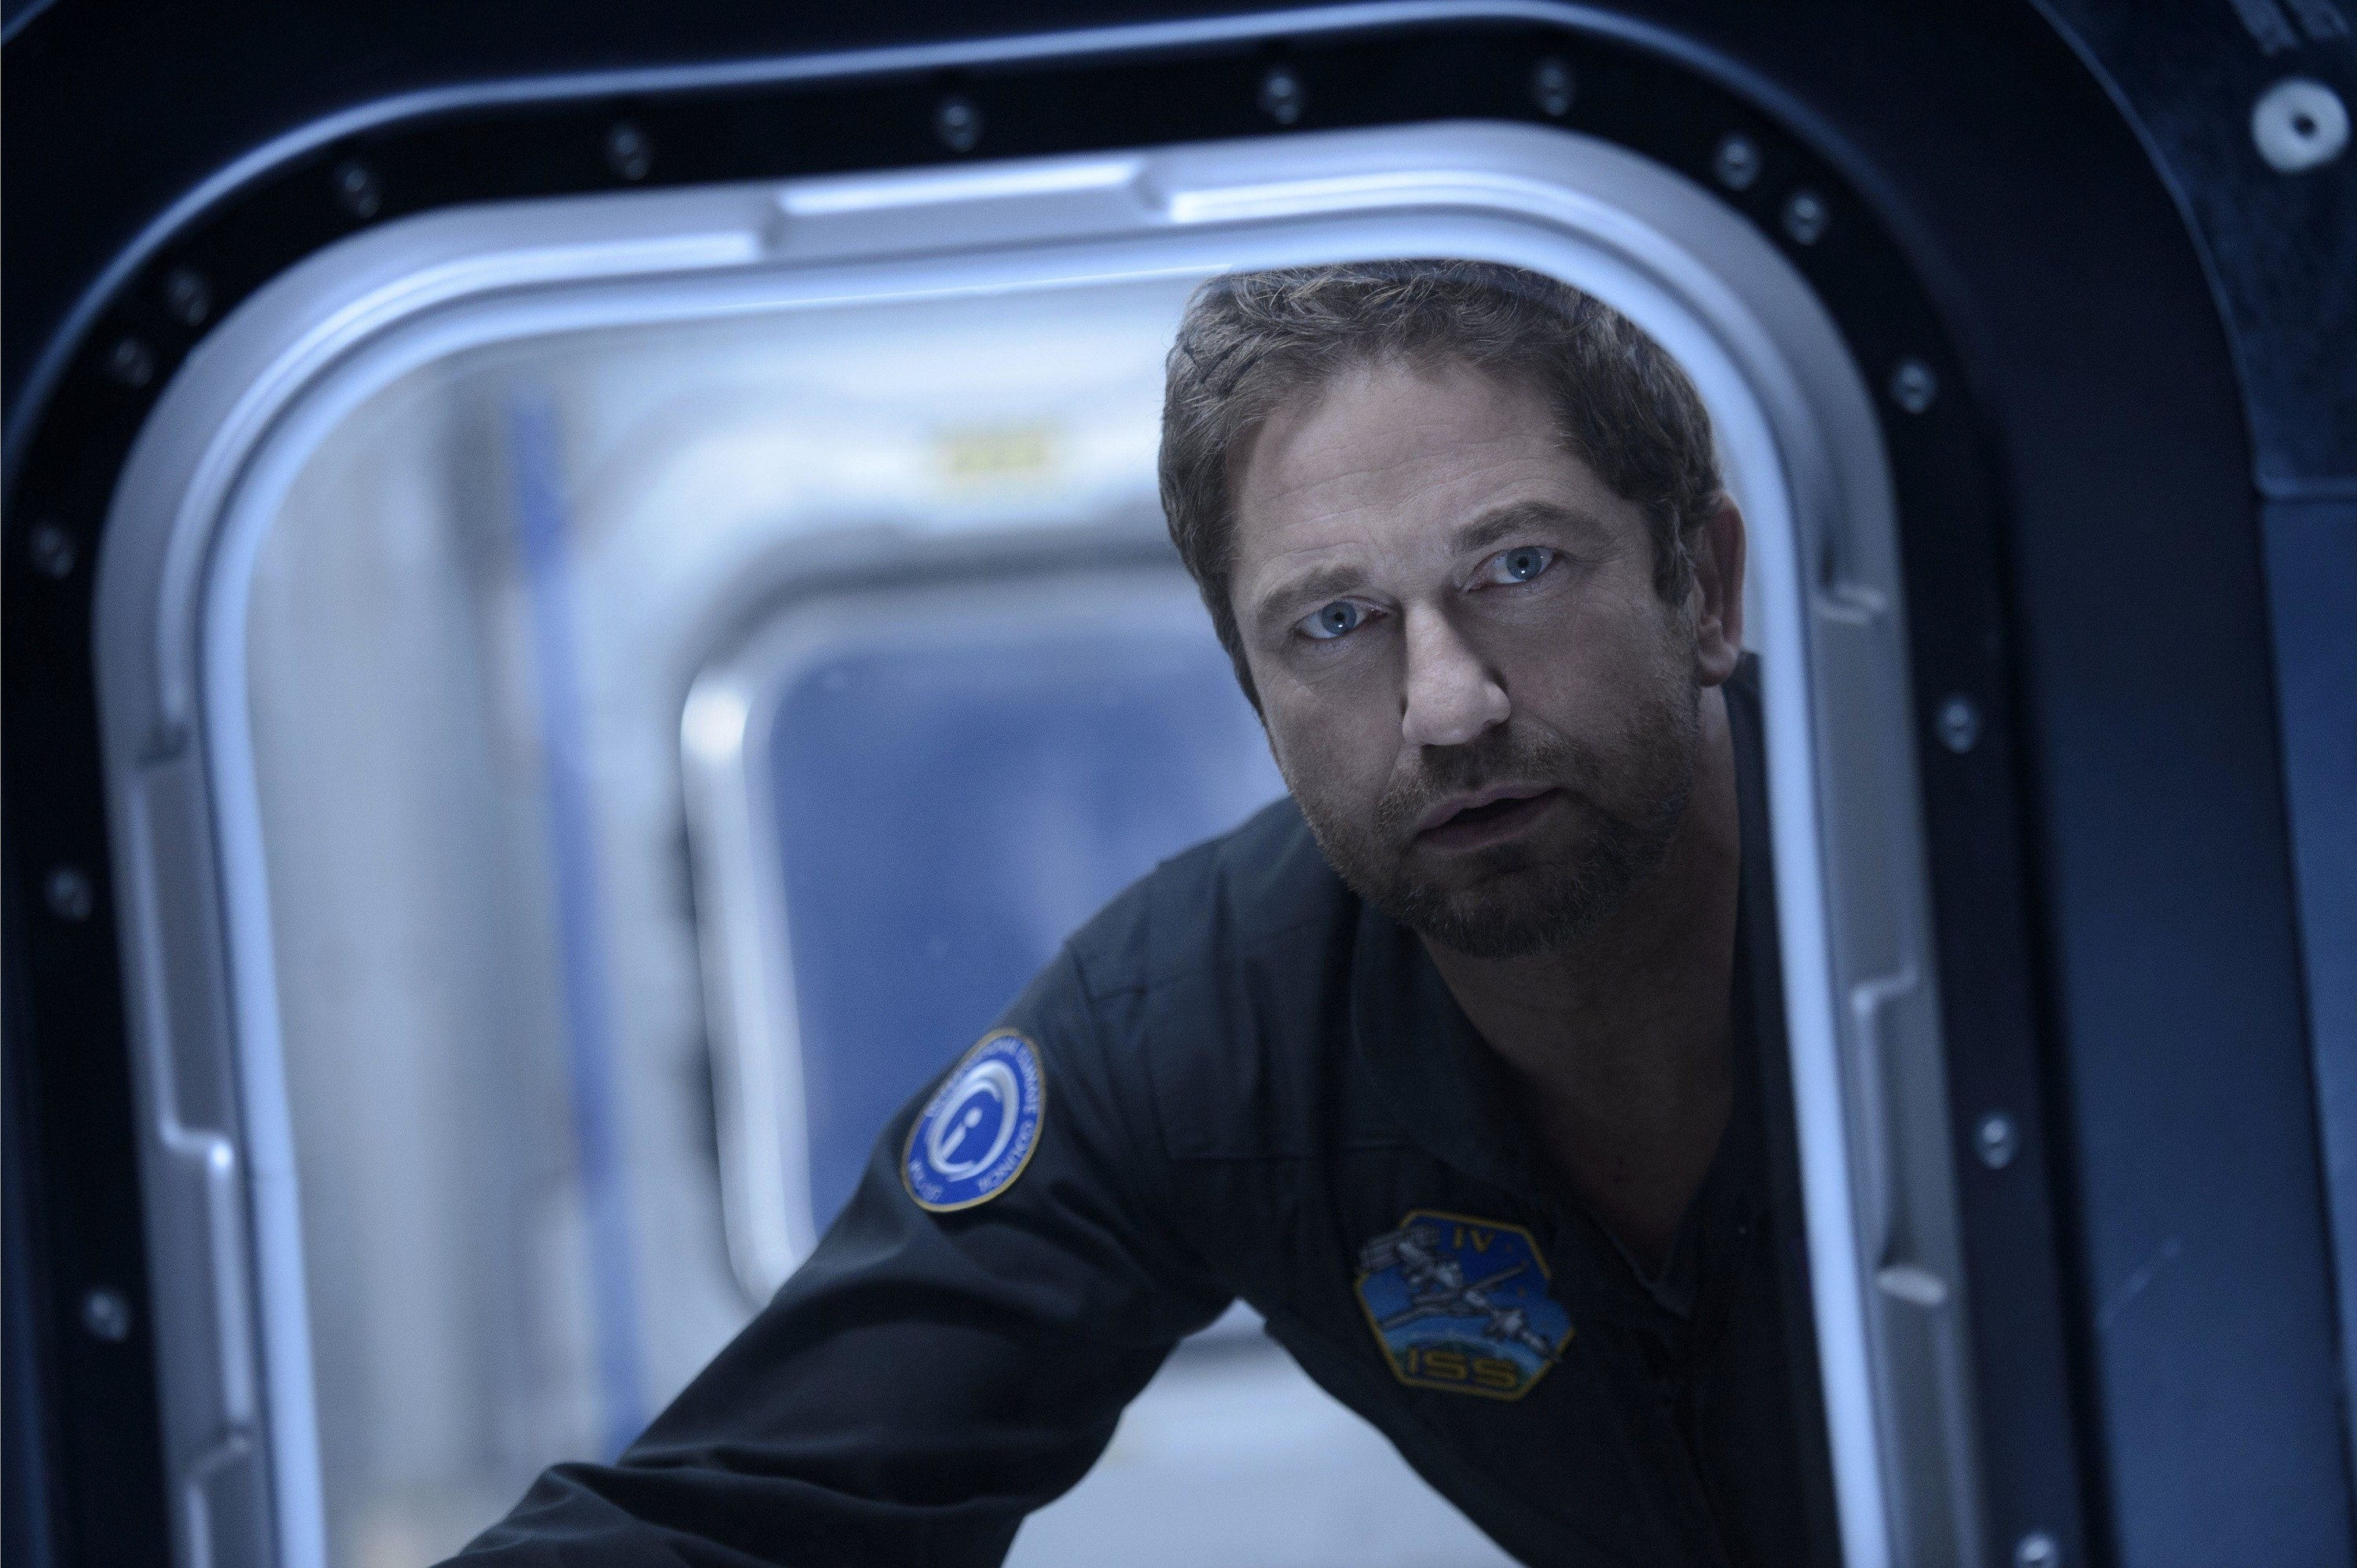 An astronaut looks out of a space vessel with concern